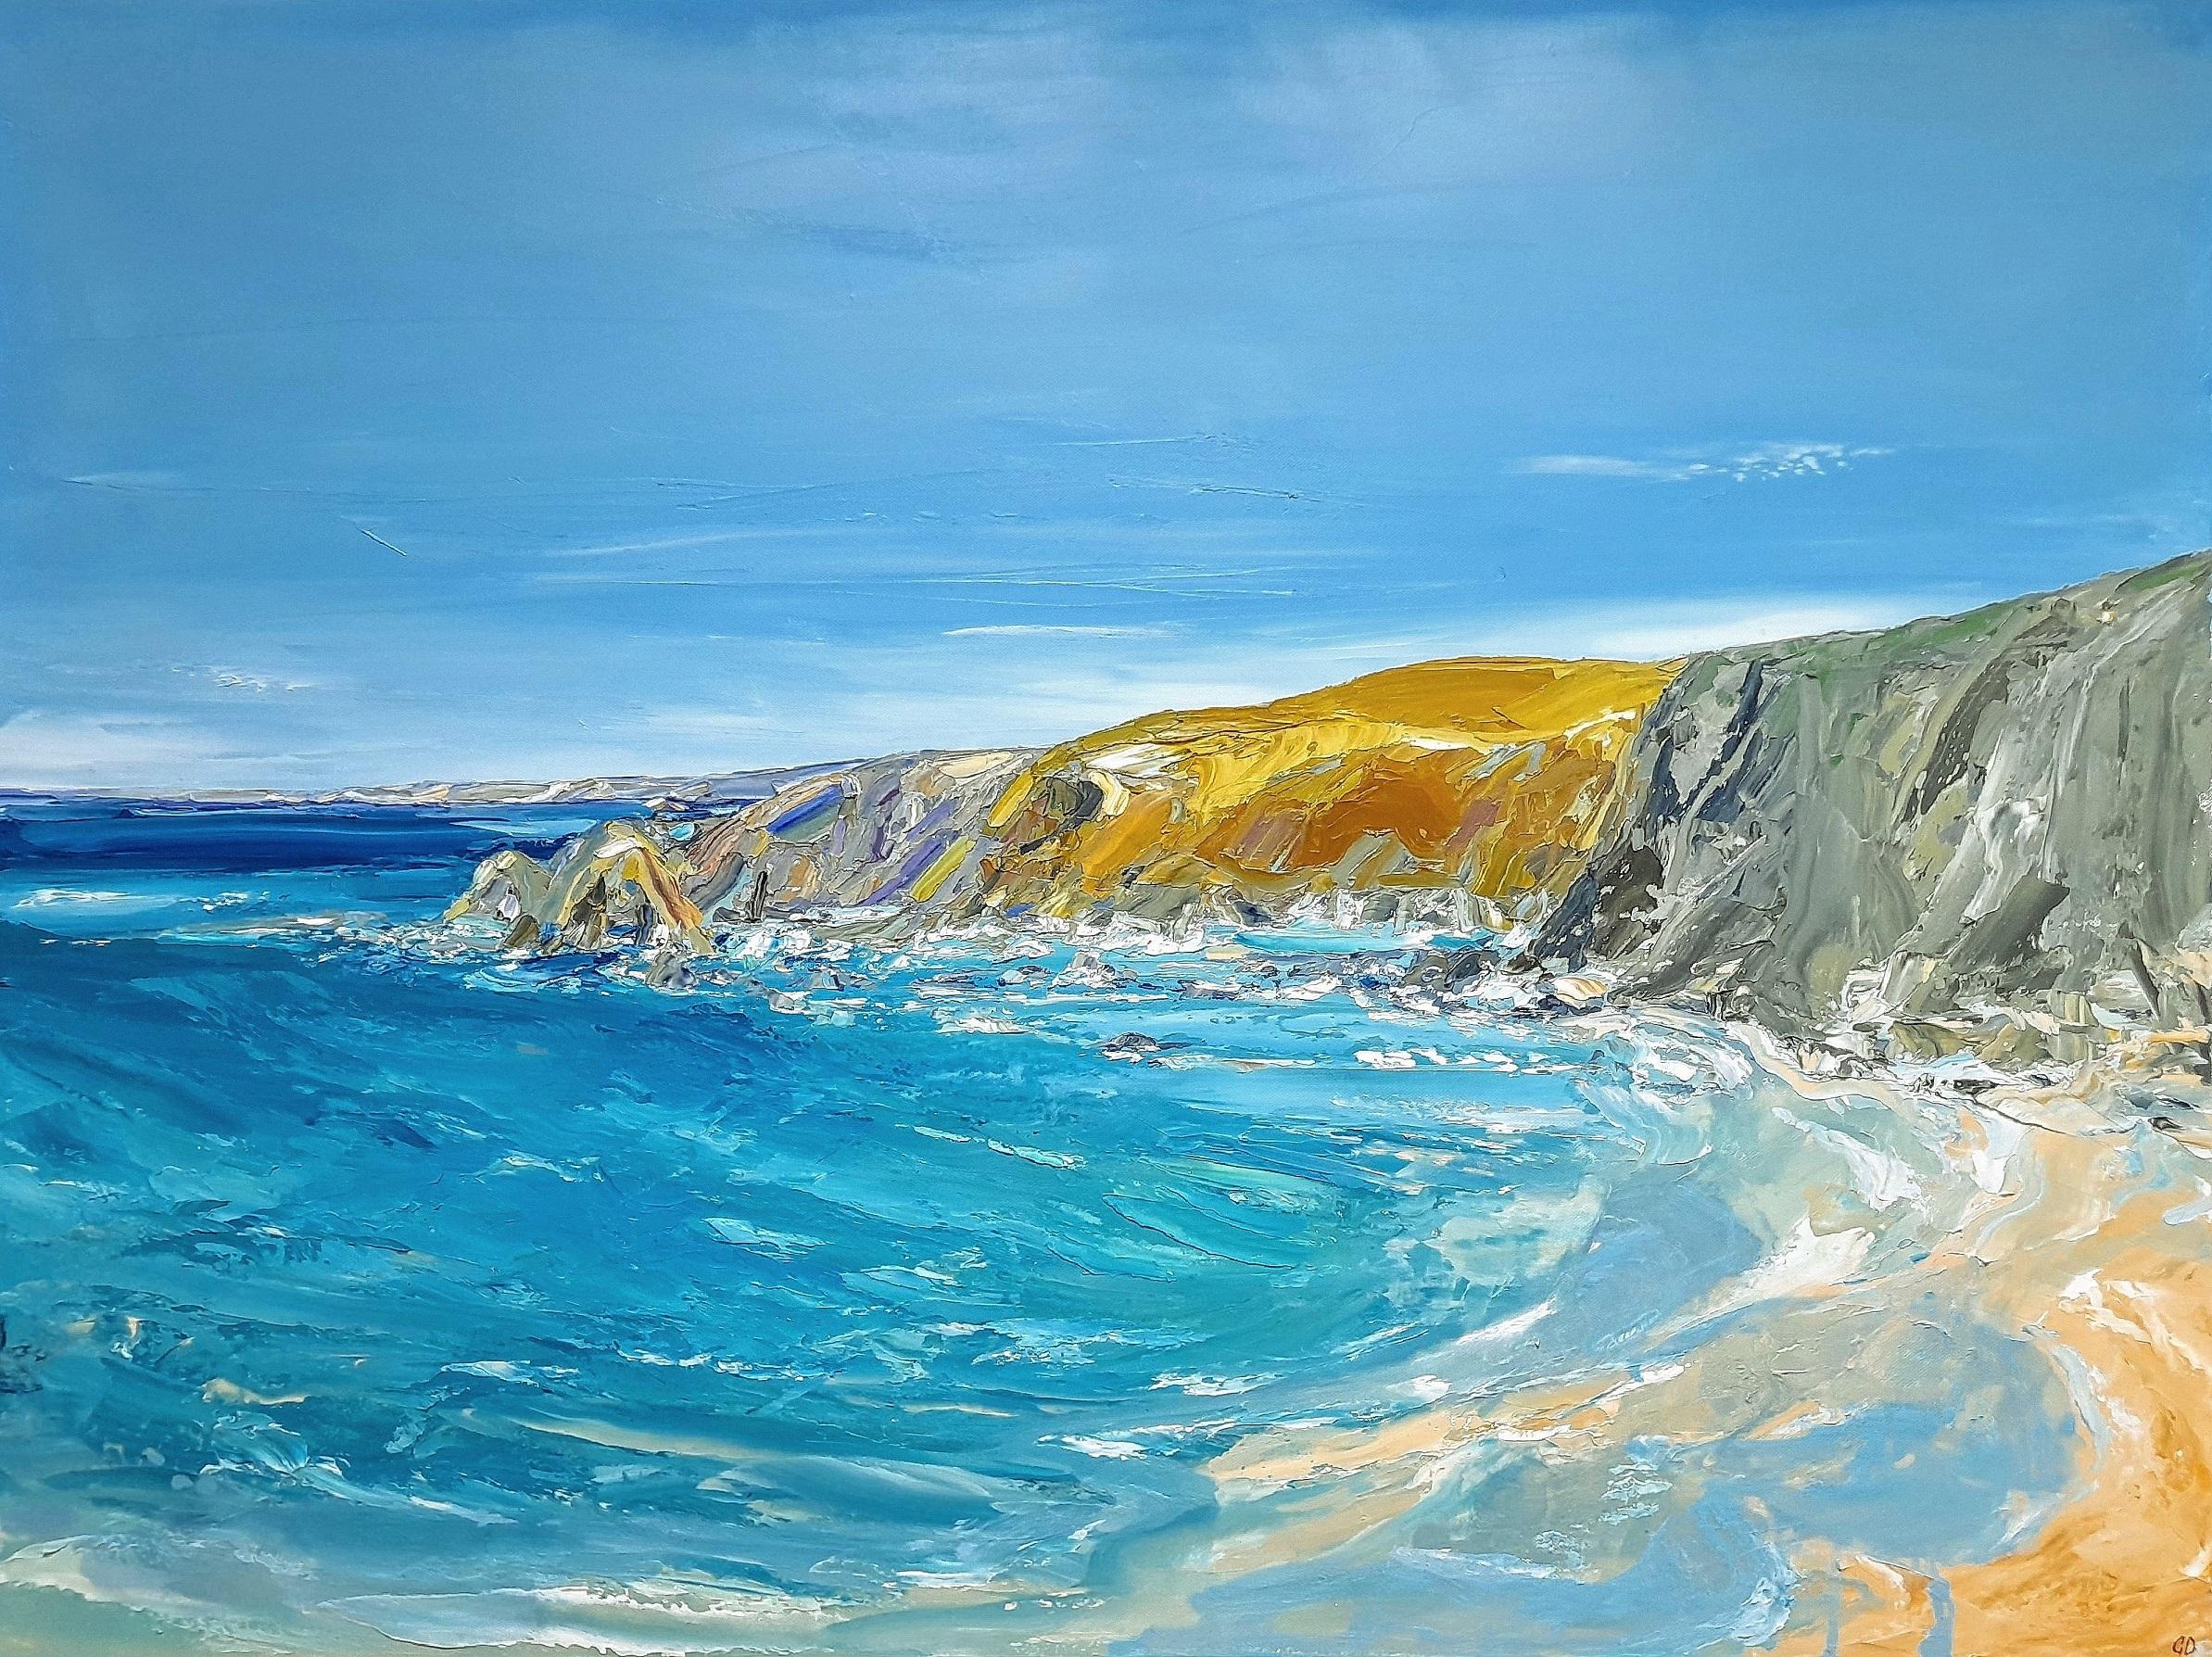 Georgie Dowling  Landscape Painting - Colourful day at Trevaunance, Seascape and Coastal painting, Beach House Art